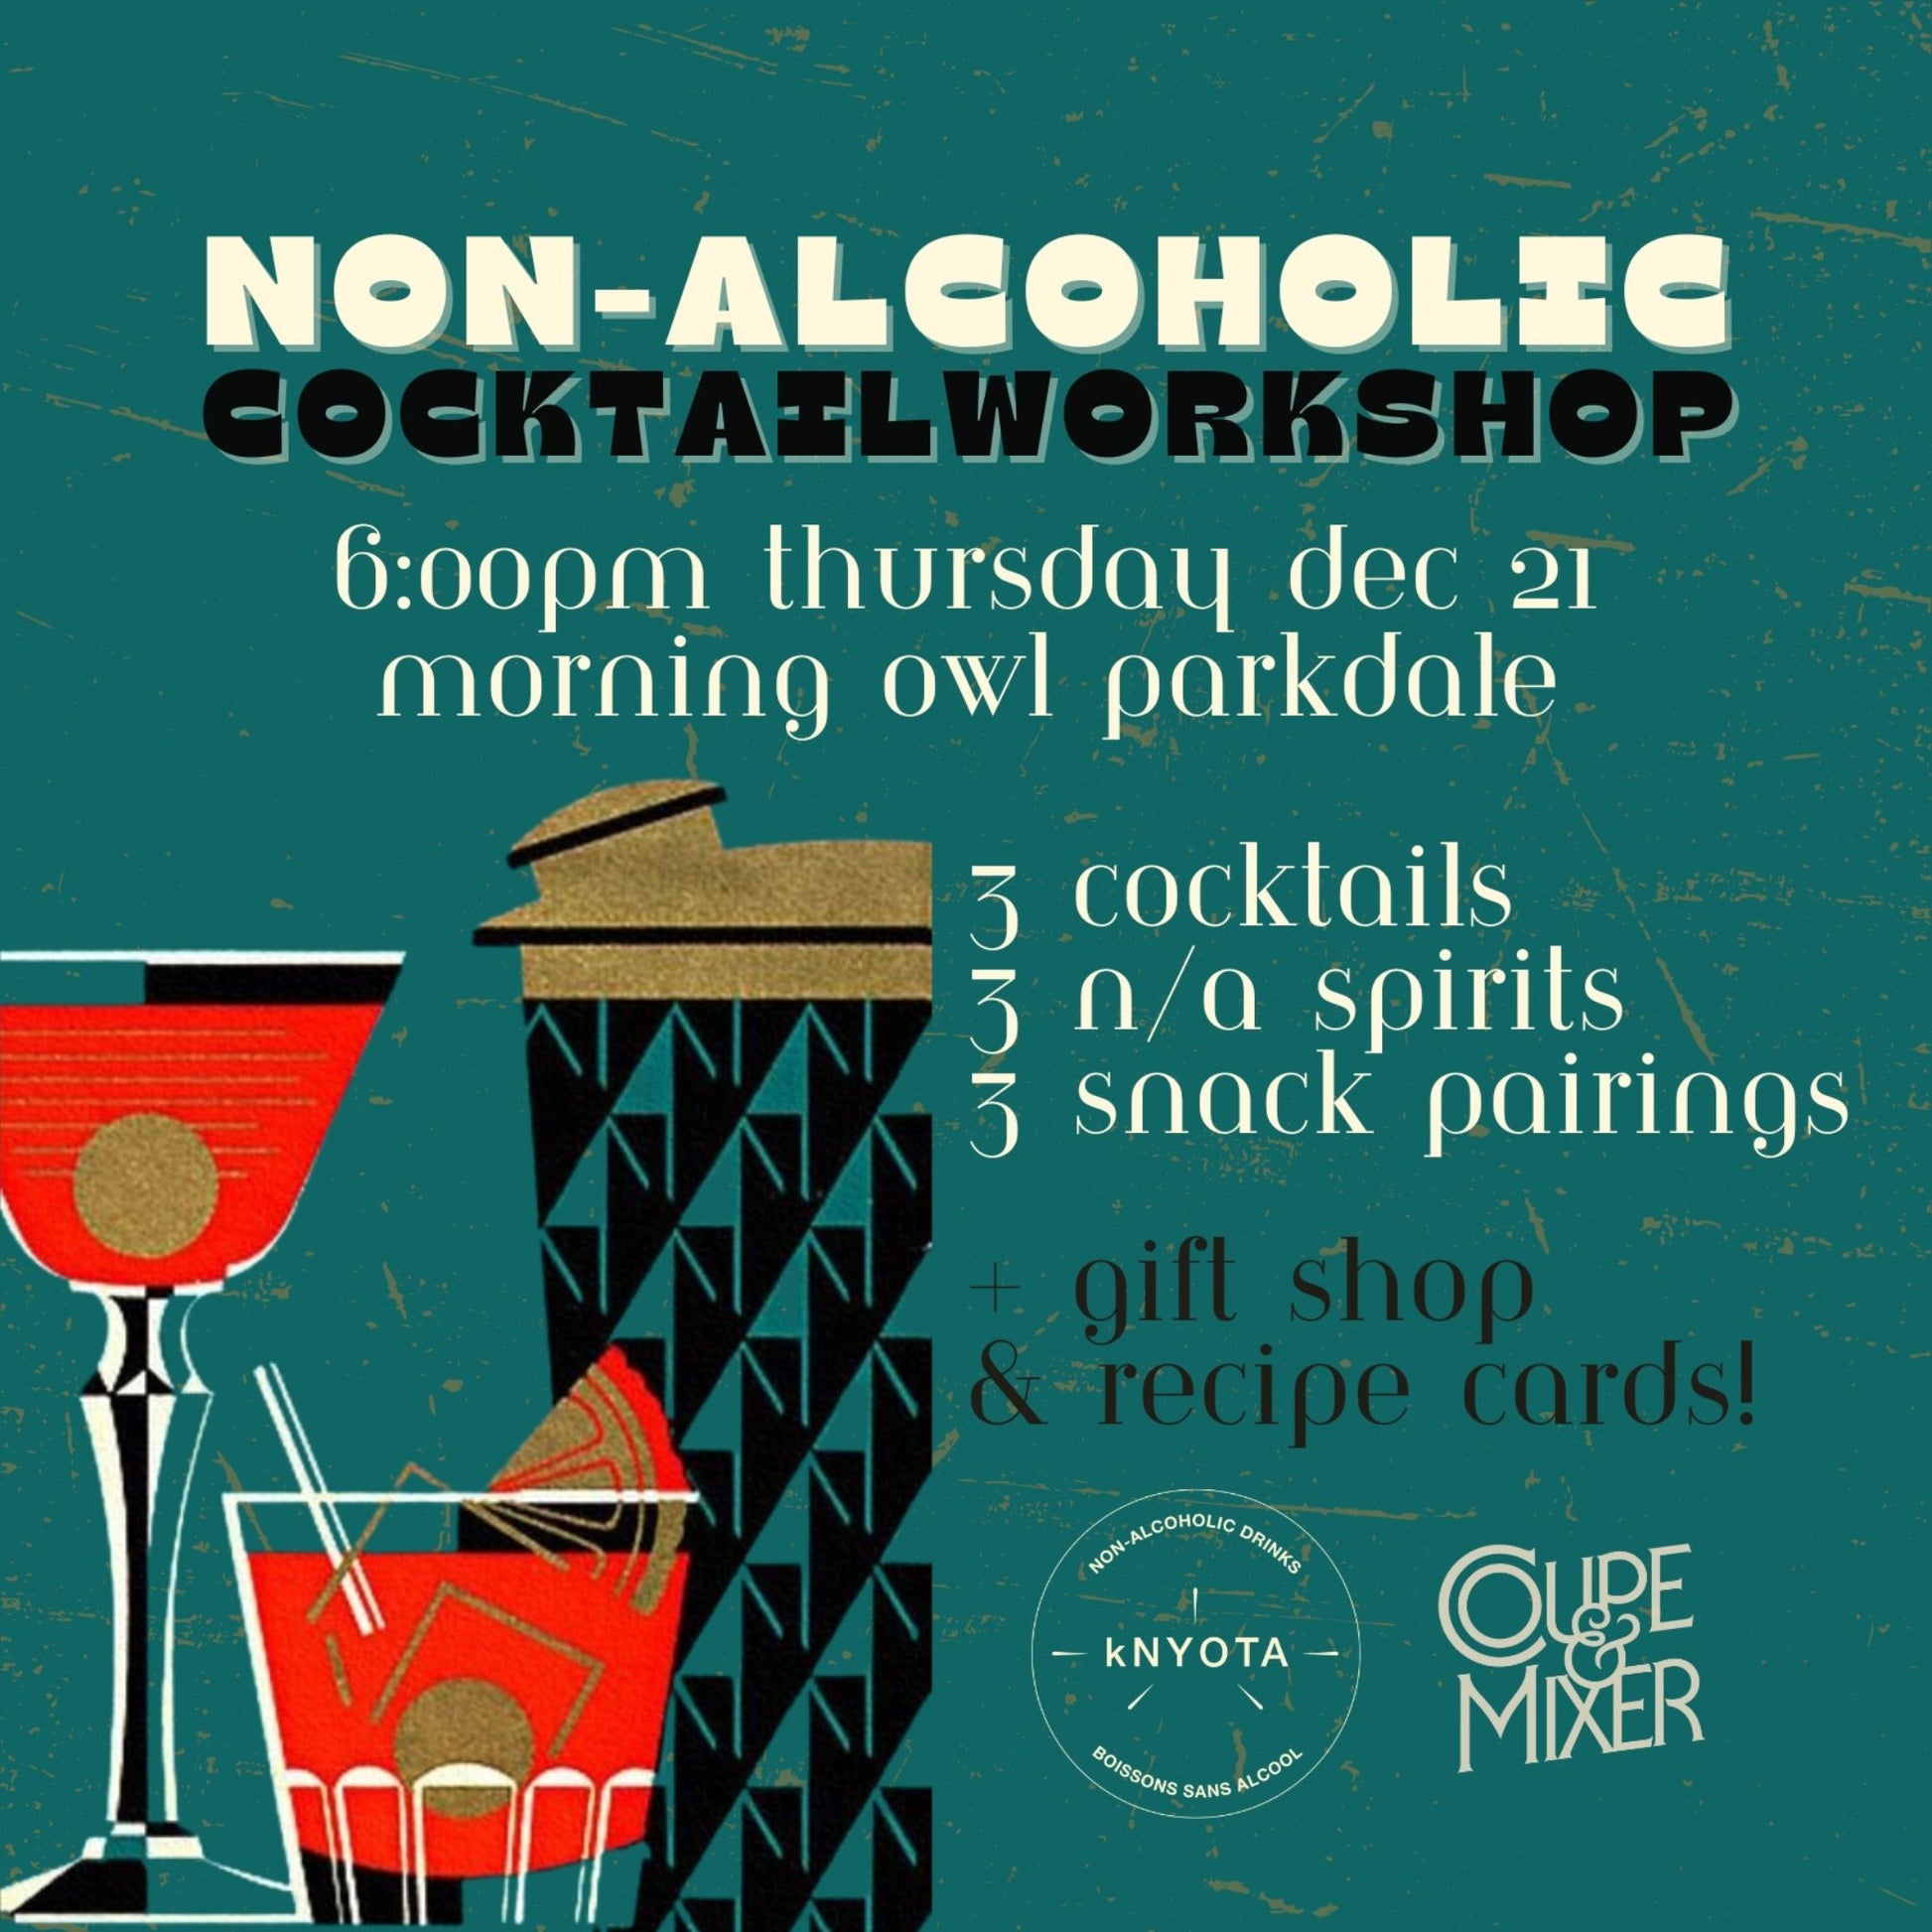 Learn how to make non-alcoholic cocktails.